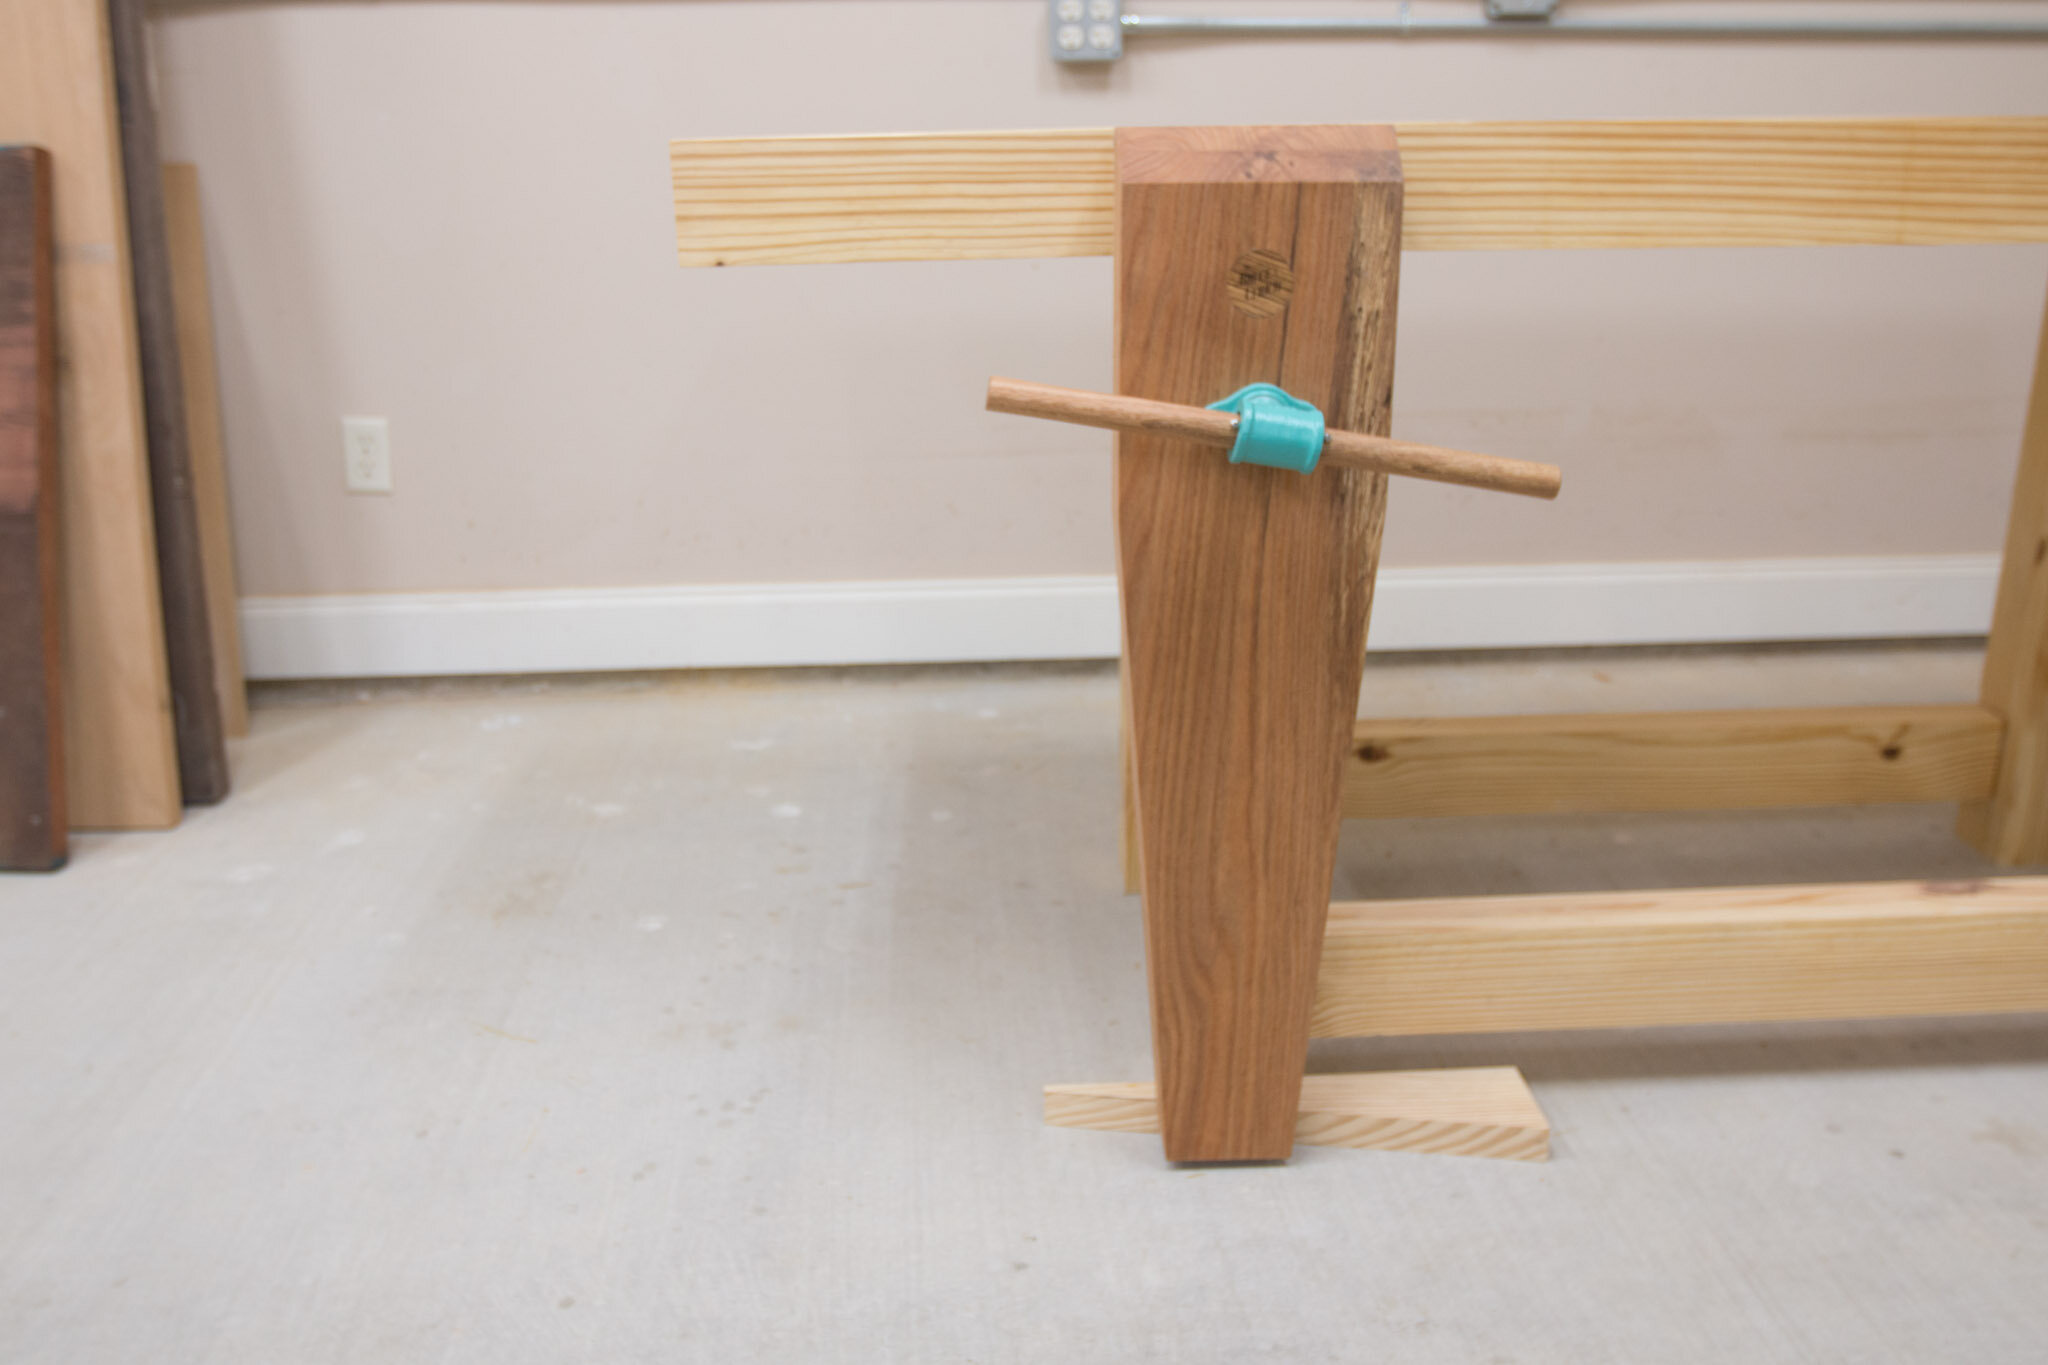 Making and Installing a Leg Vise — Bruce A. Ulrich